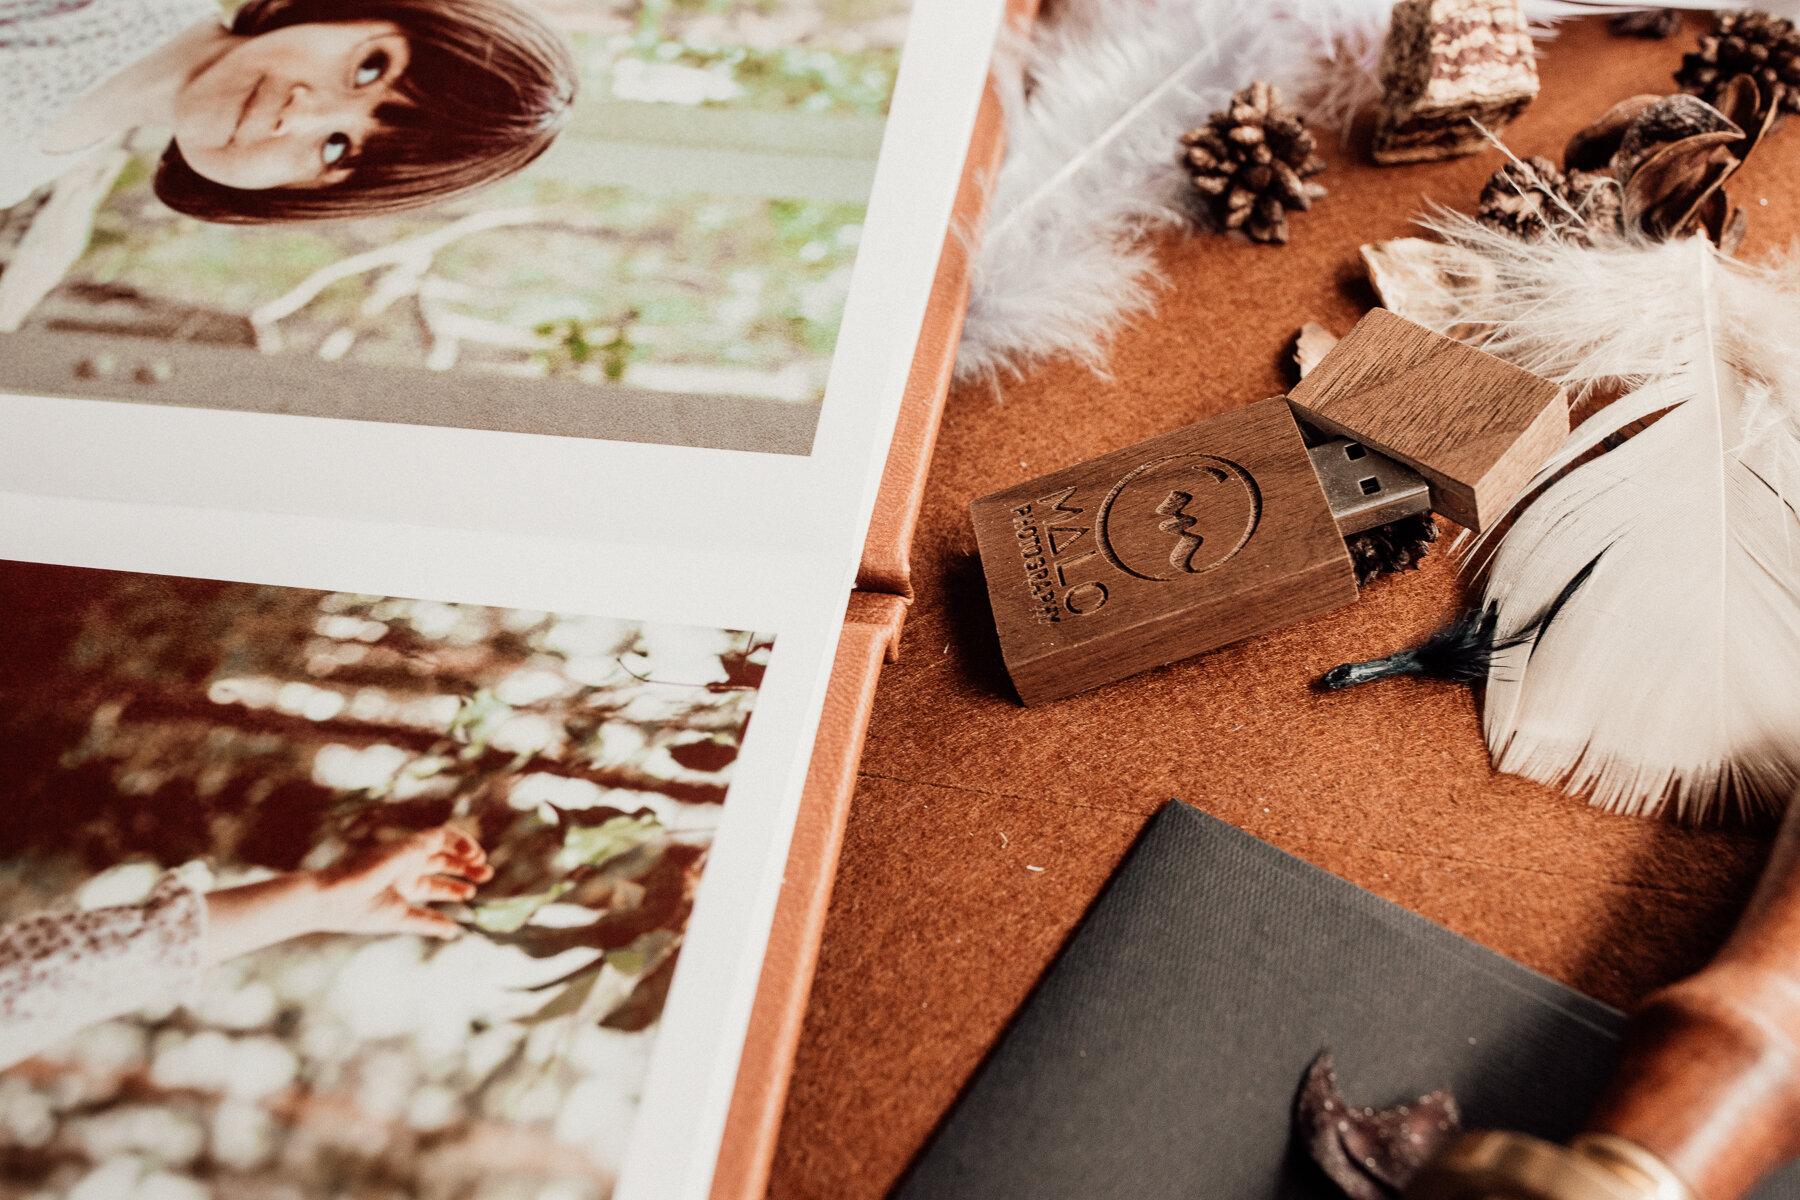 Leather Malo Family Photo Book and USB wooden Stick Brisbane The Gap 5